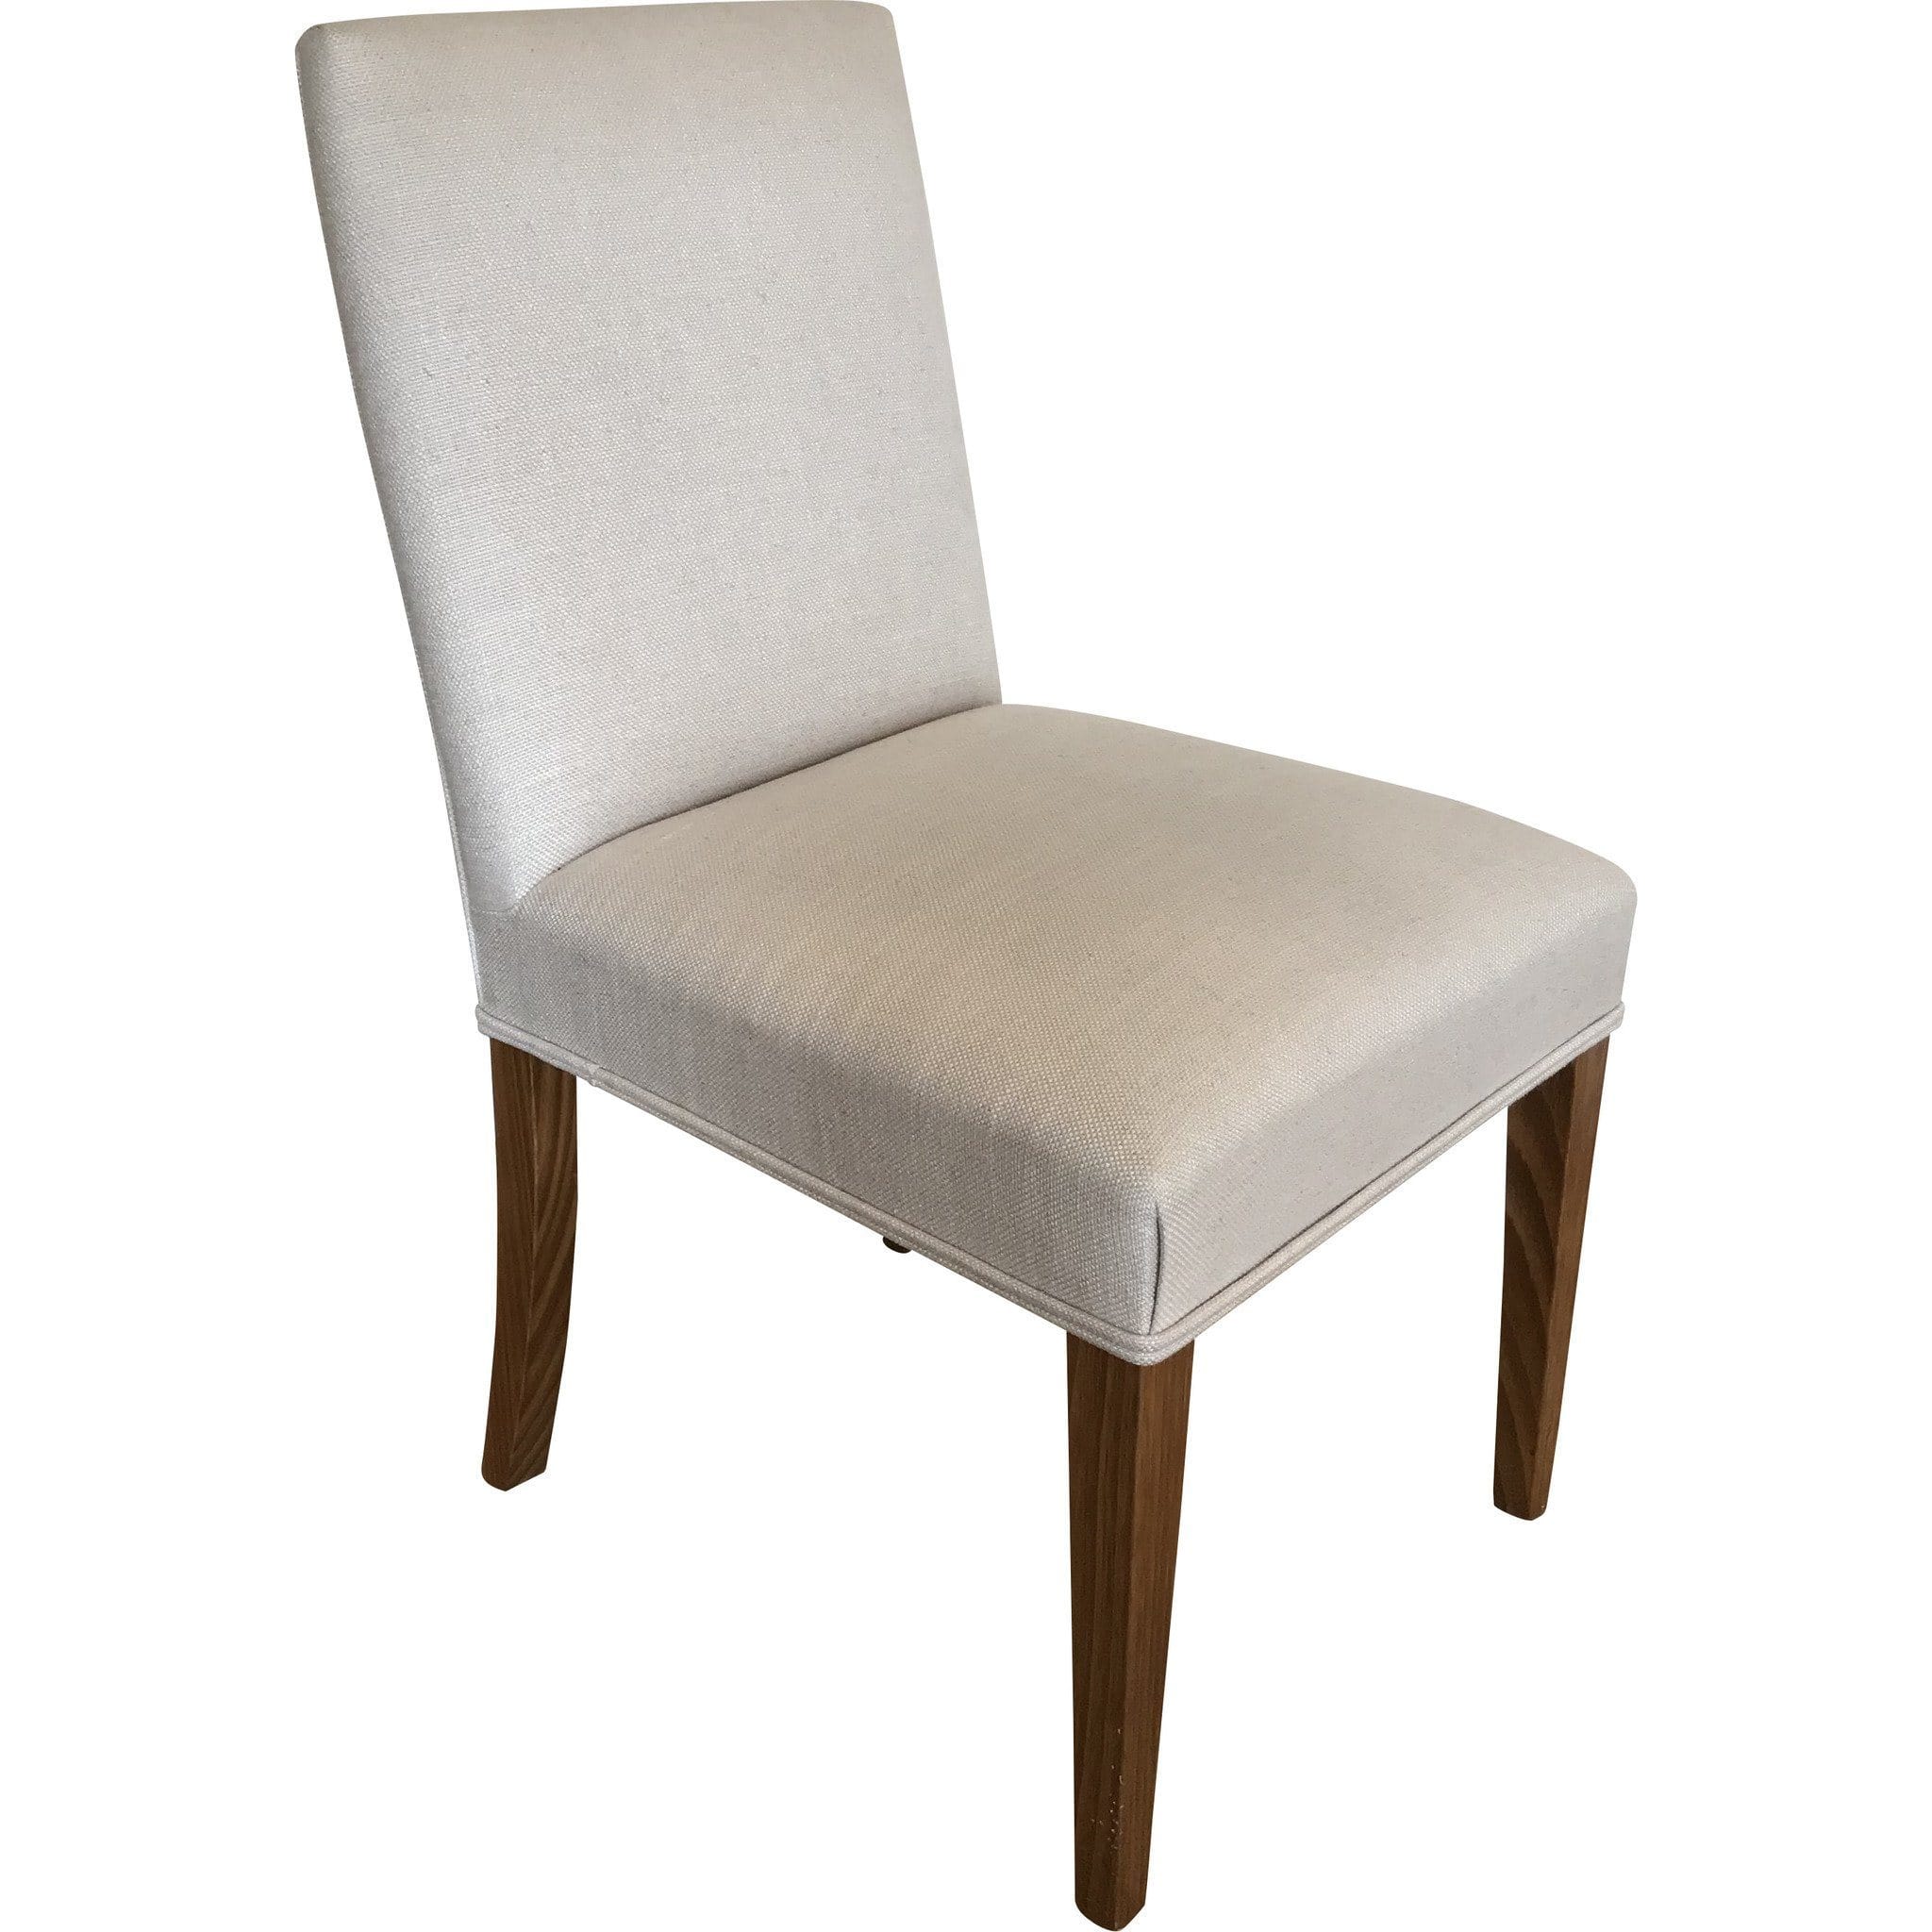 Tapered Leg Dining Chair - Short Gaudion Furniture